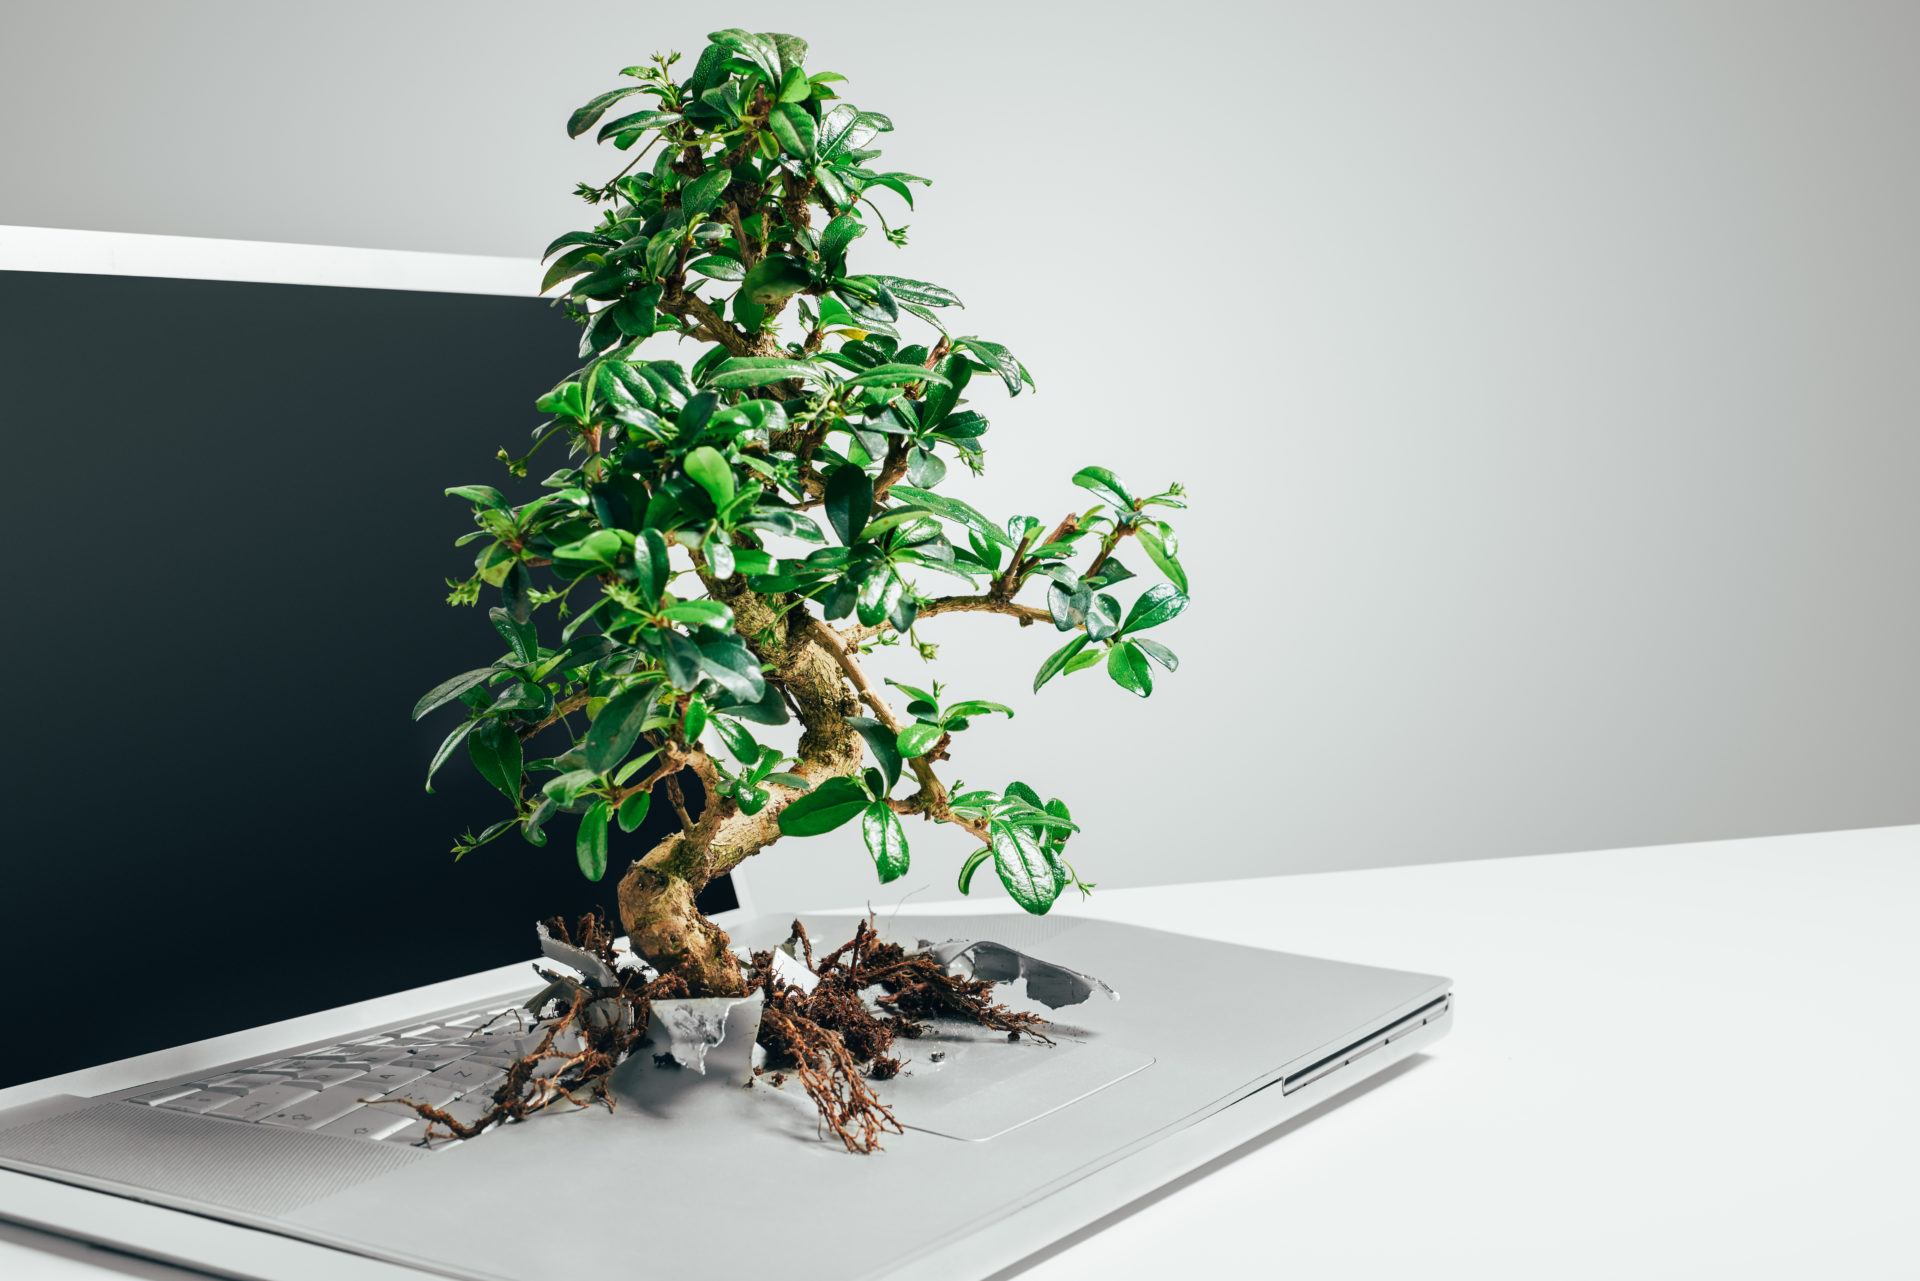 Studio shot of a bonsai tree growing out from a laptop in studio against a grey background, sustainability, responsible management.